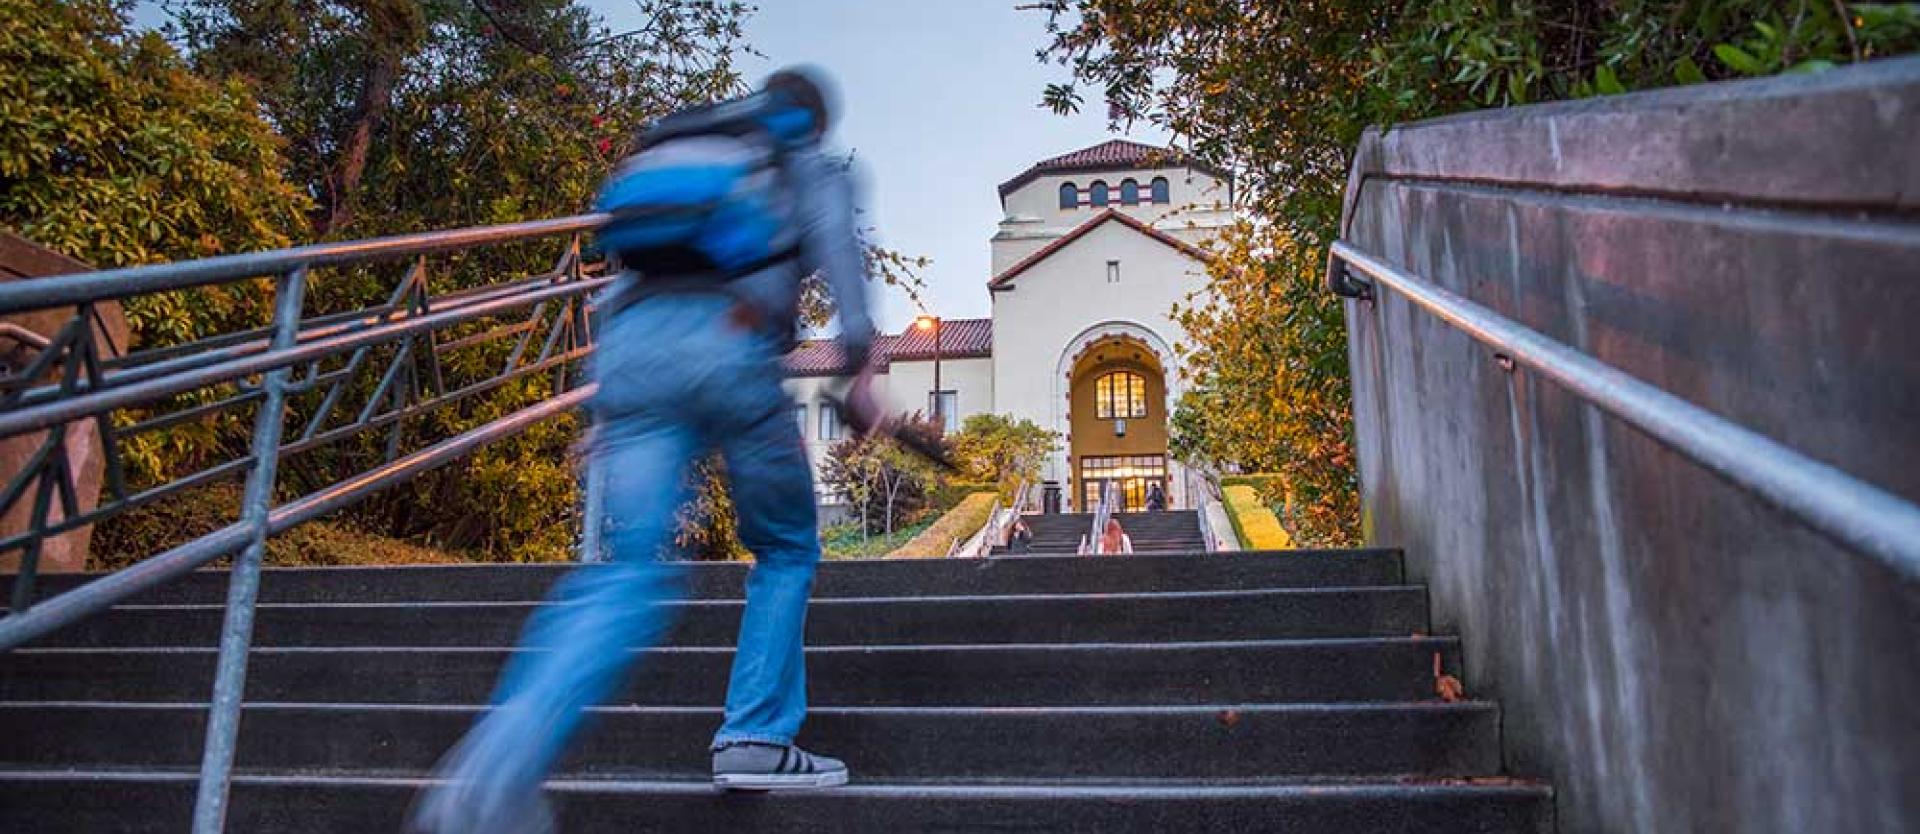 Climbing the stairs to Founders Hall